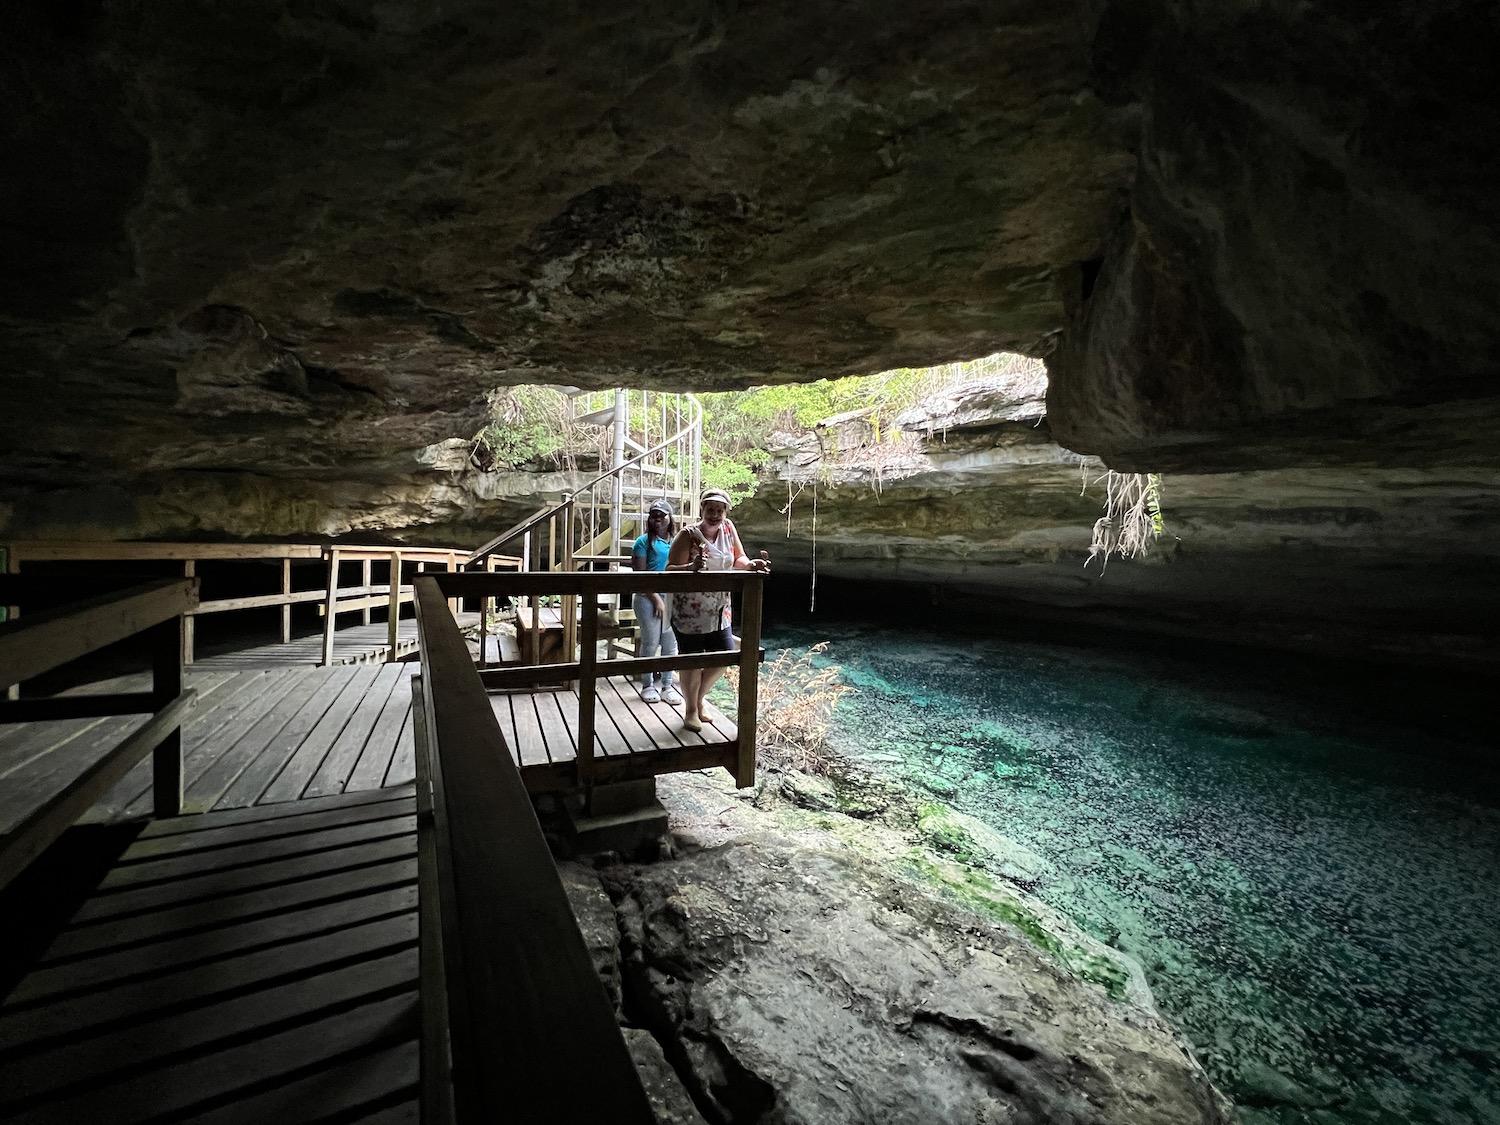 To get into Ben's Cave at Lucayan National Park, you must climb down a spiral staircase.